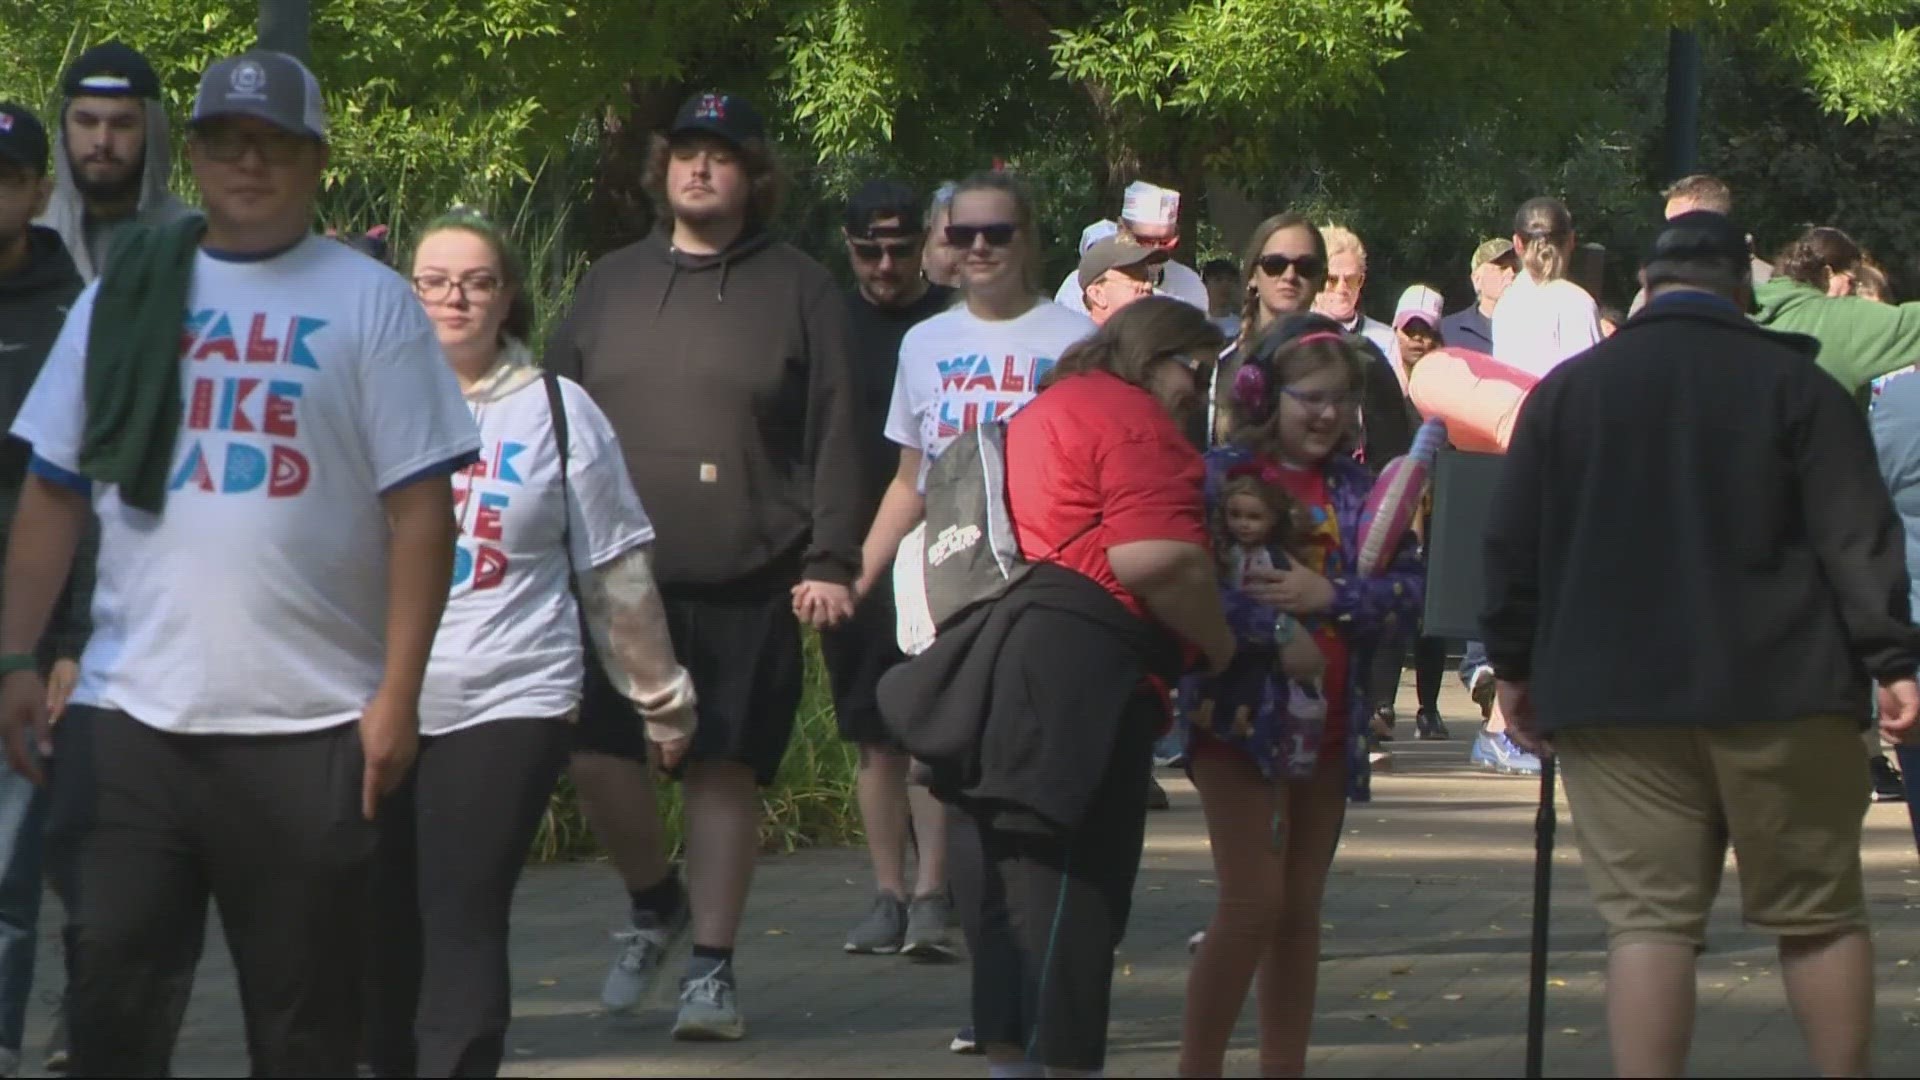 Mothers Against Drunk Driving held a walk in Hillsboro on Saturday to raise awareness and funds to help prevent the preventable crime.